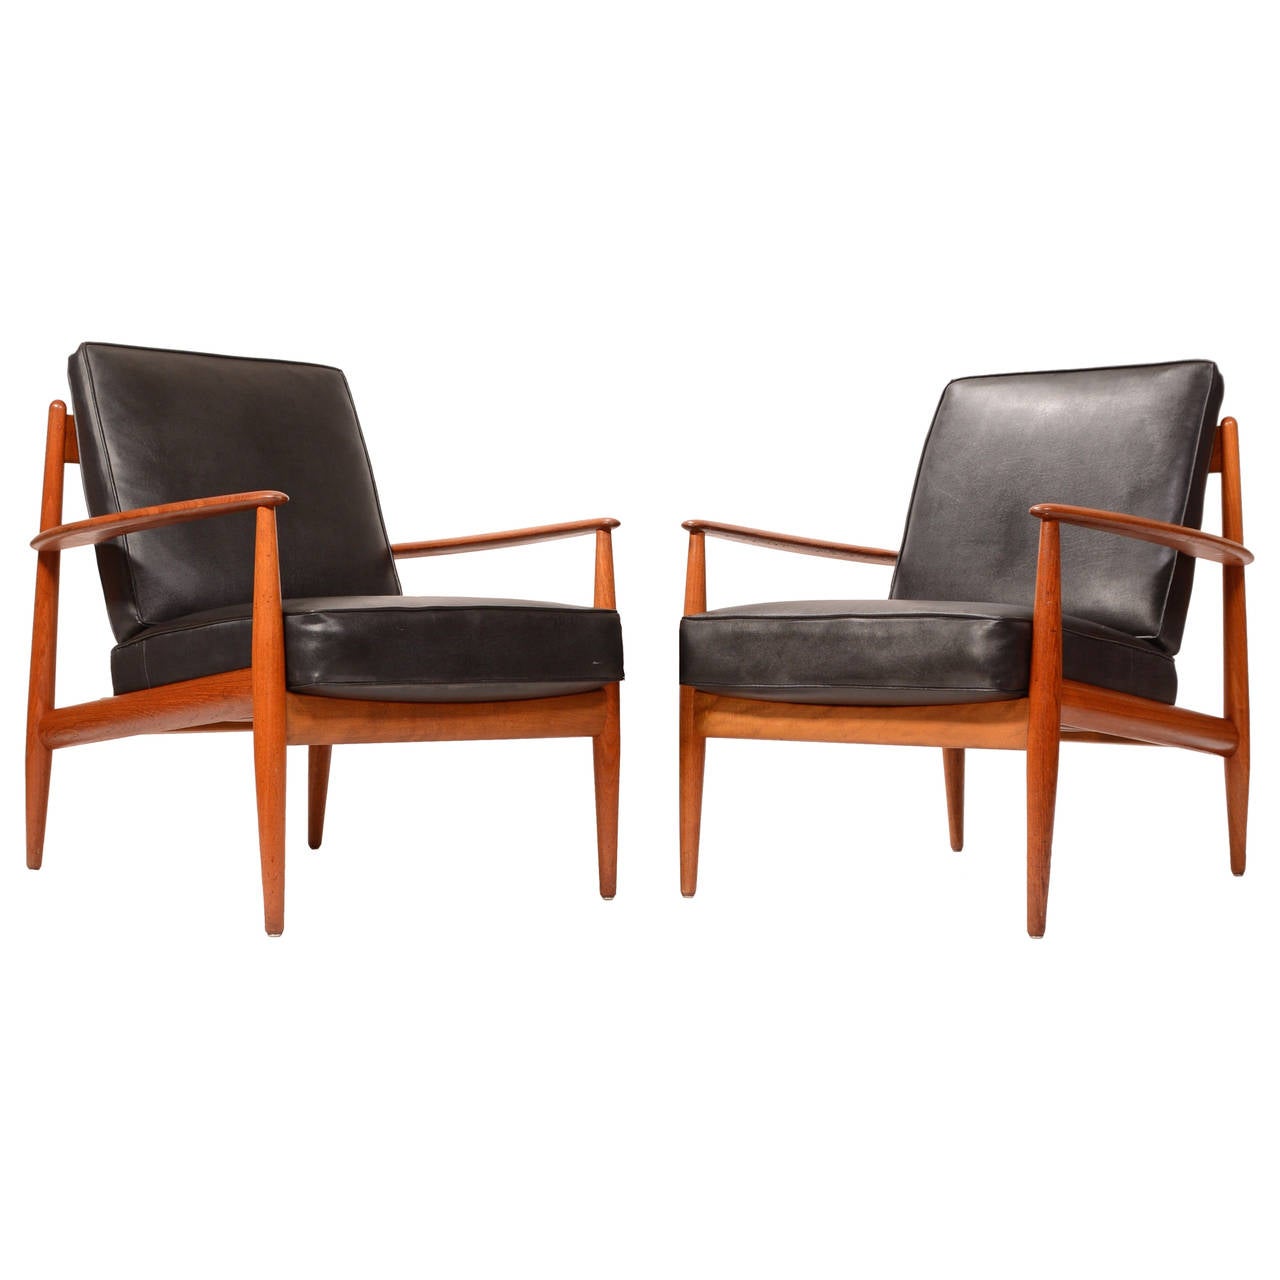 Early Grete Jalk Teak Lounge Chairs with Banding Backs and Seats